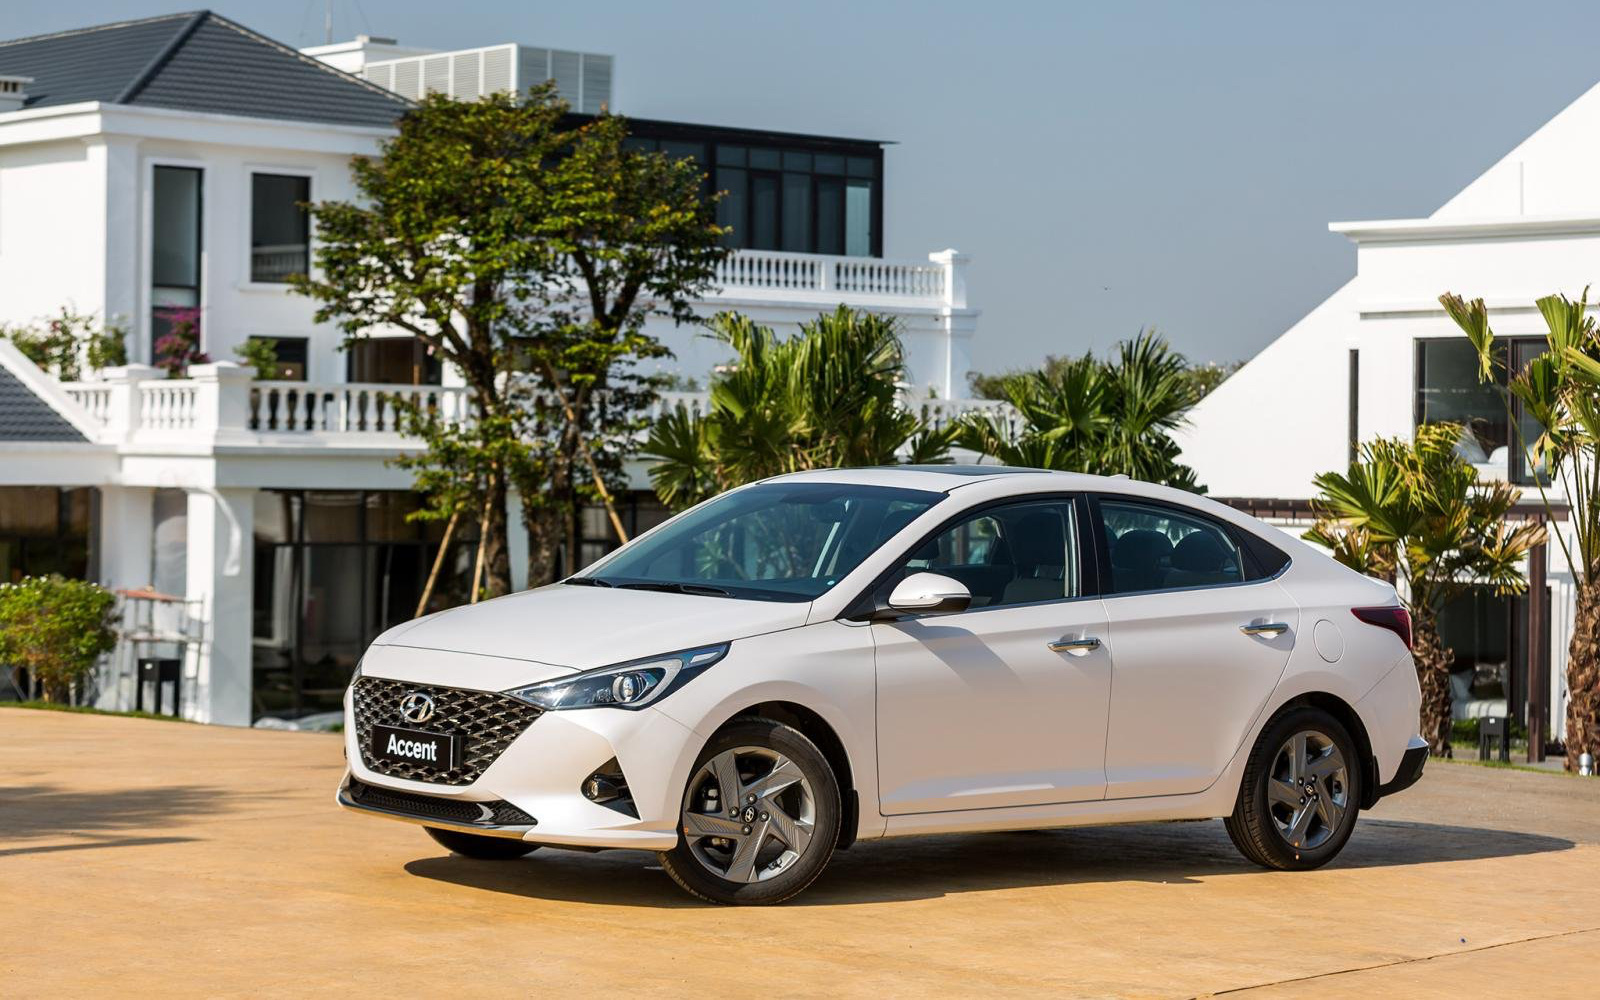 Hyundai announced that sales in March 2022 increased by nearly 70% compared to February